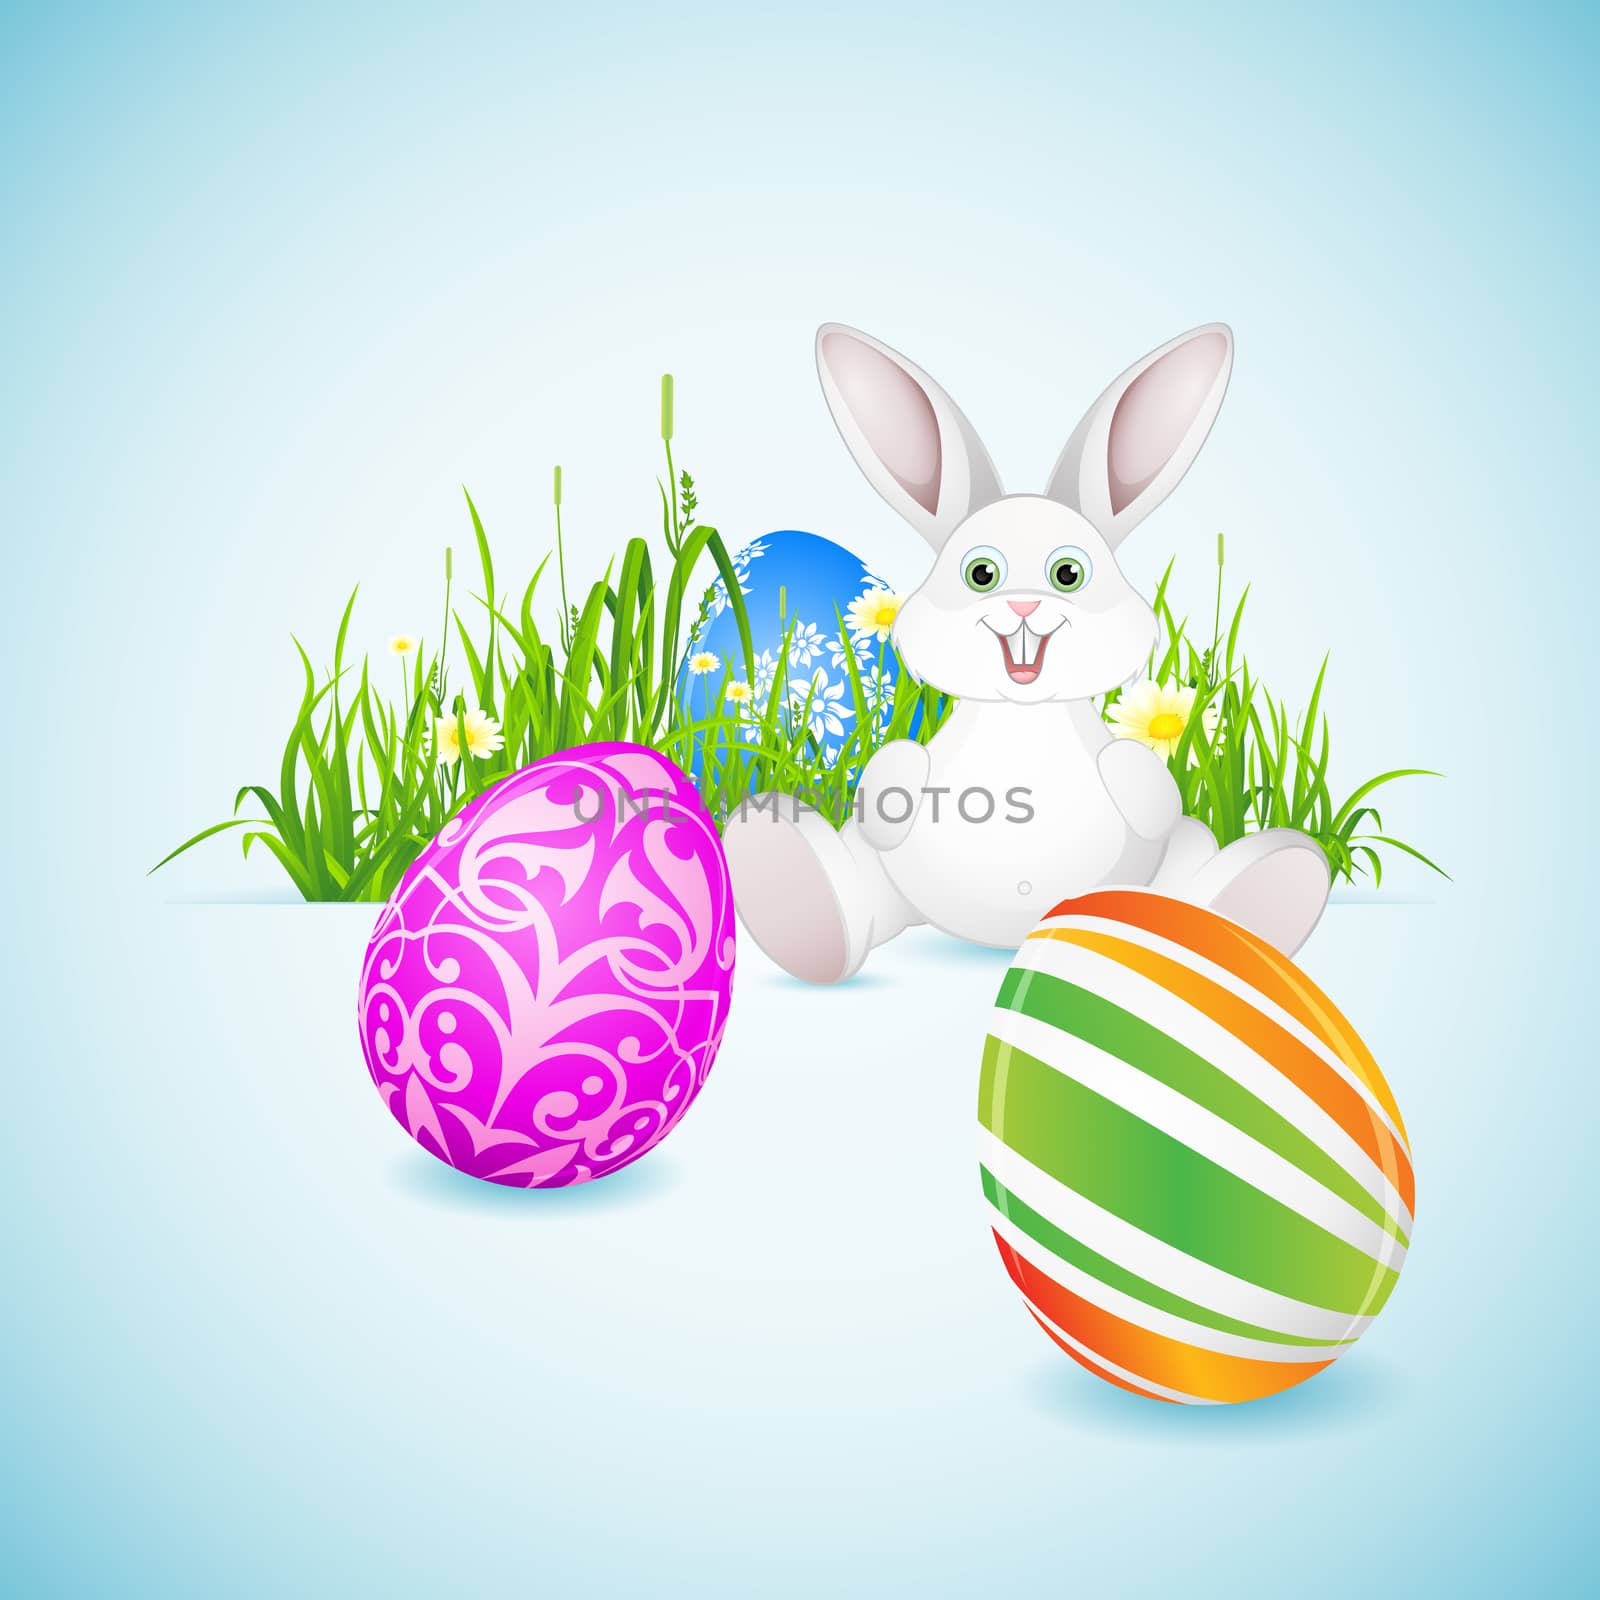 Easter Background with Grass, Eggs and Rabbit